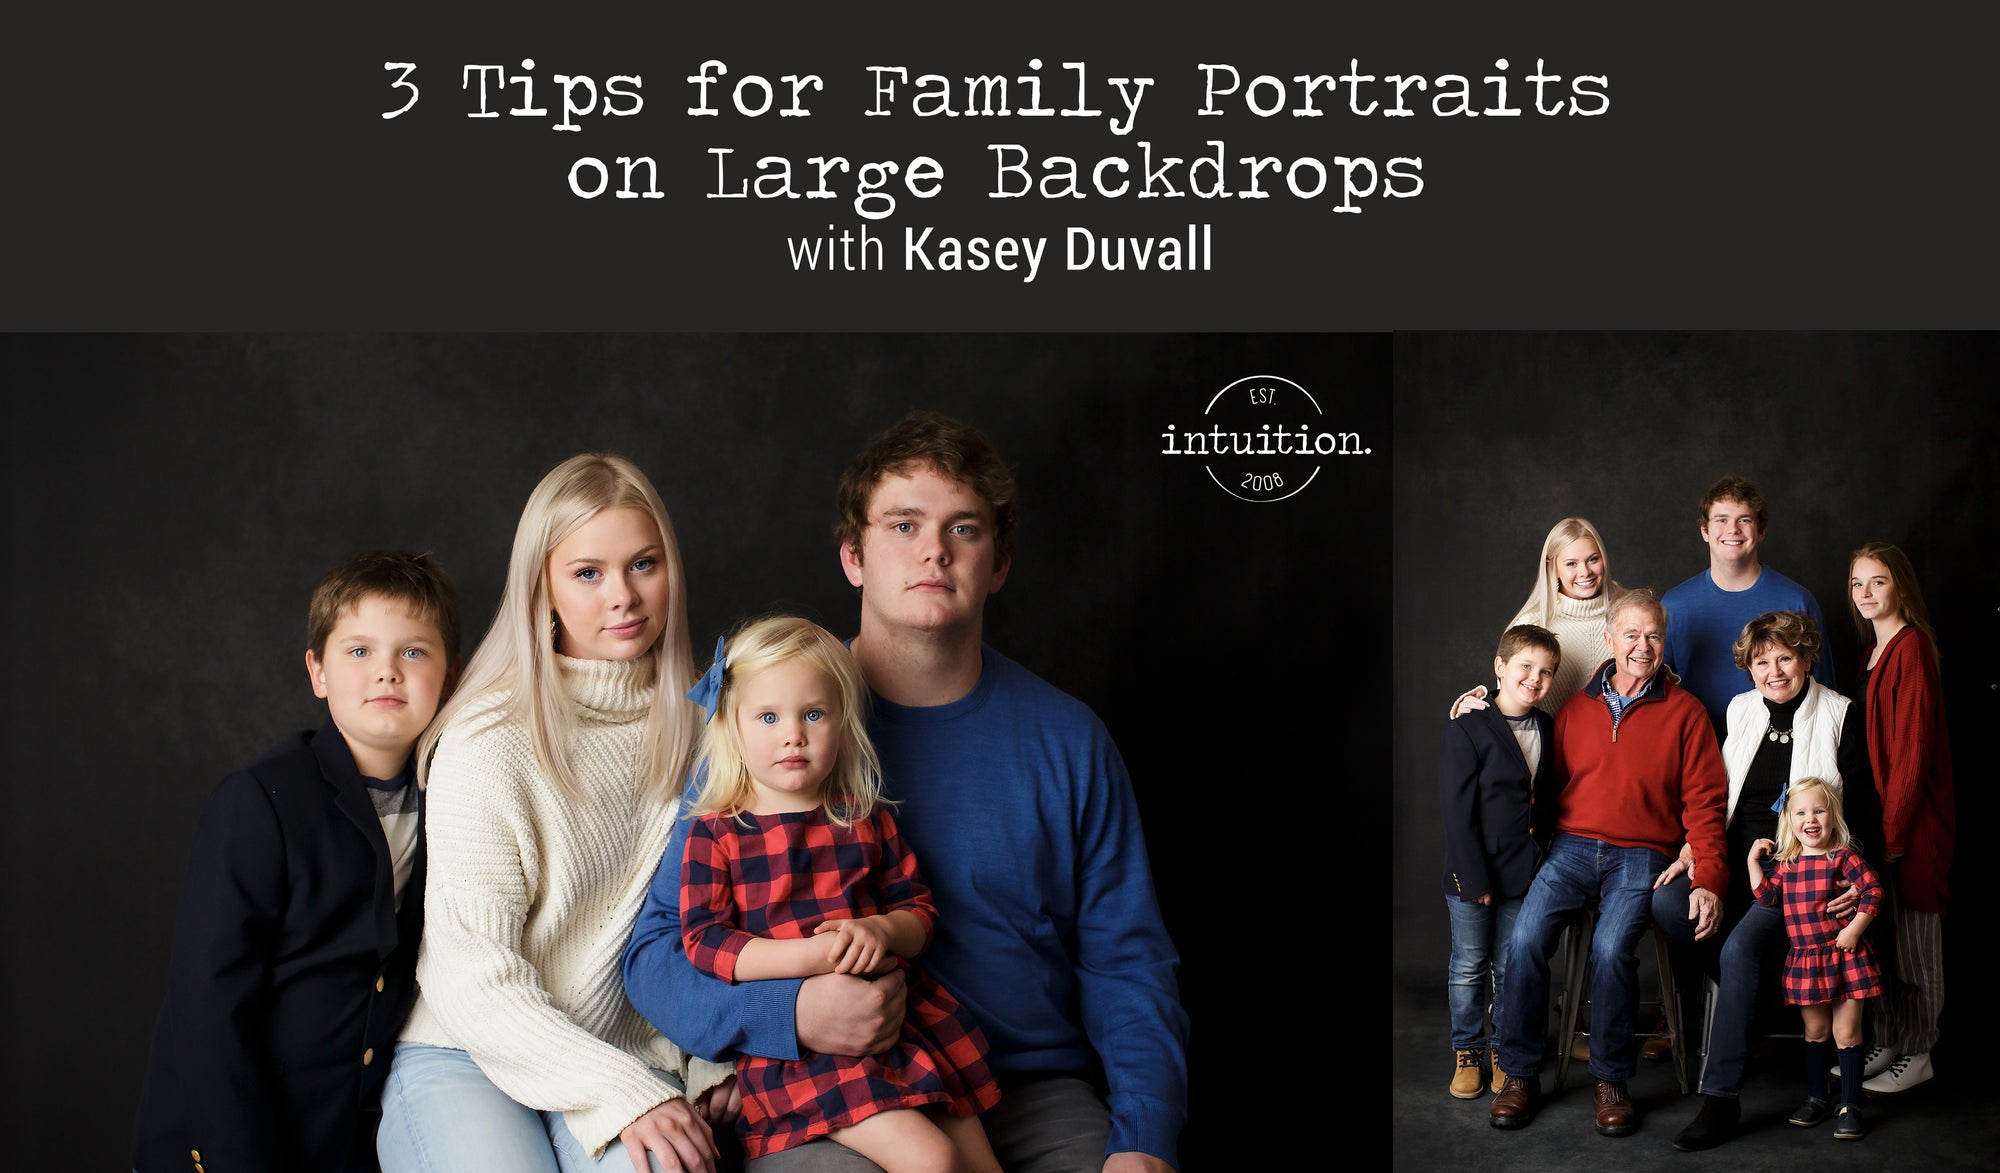 3 Tips for Family Portraits on Large Backdrops with Kasey Duvall